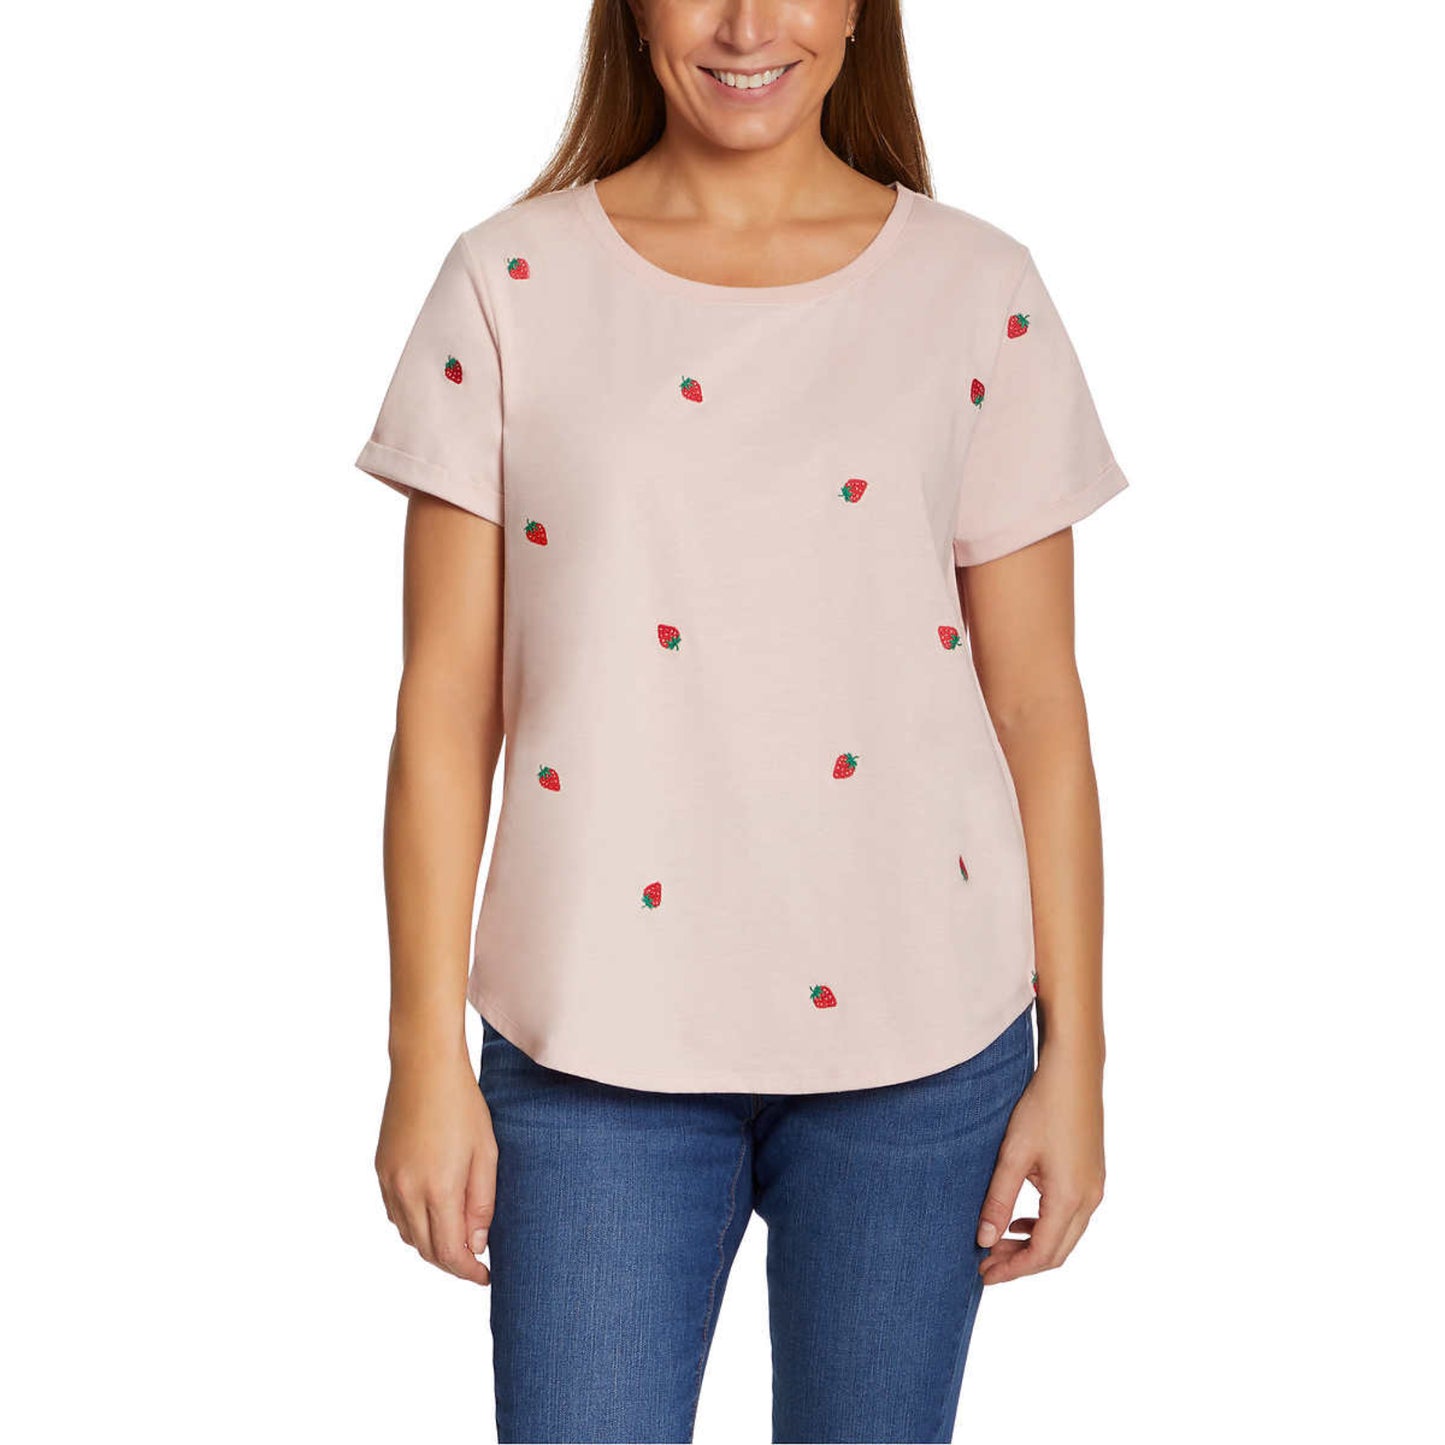 Vintage America Women's Strawberries Embroidered Relaxed Fit Tee Lightweight Cotton Blend T-Shirt